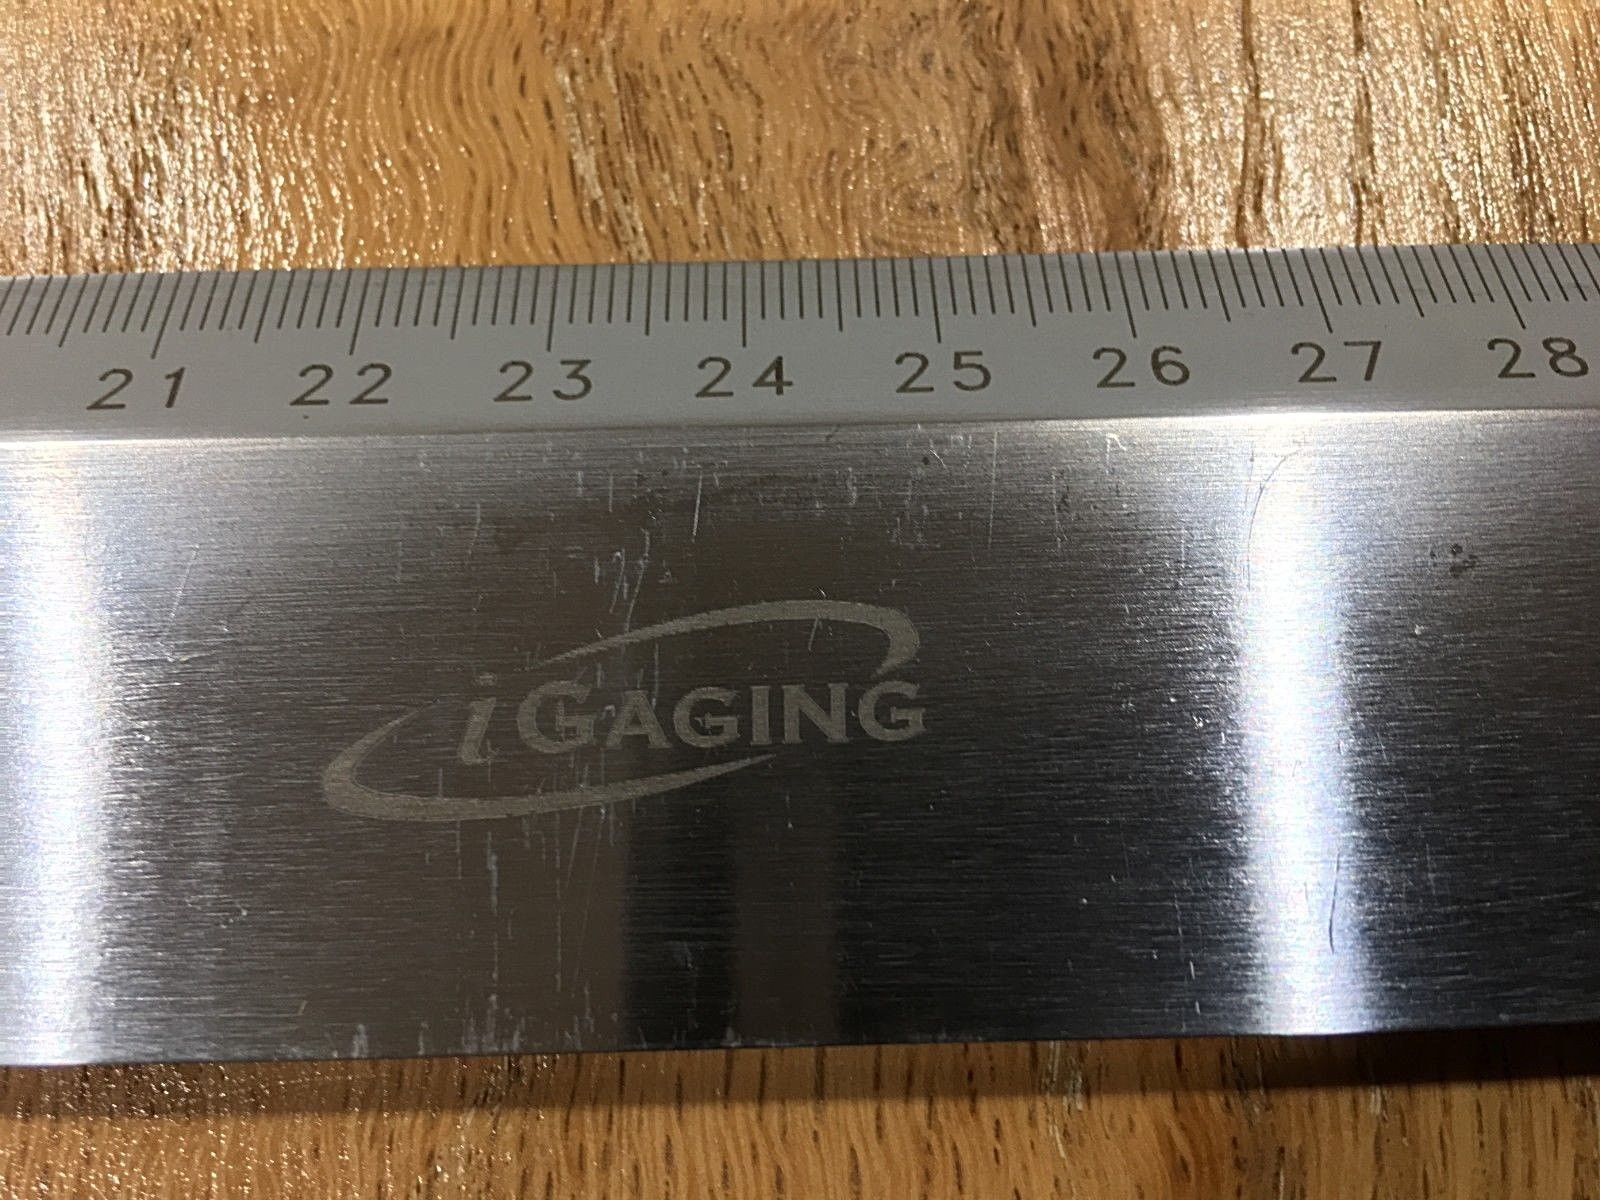 900mm iGaging Precision Straight Edge with Ruler